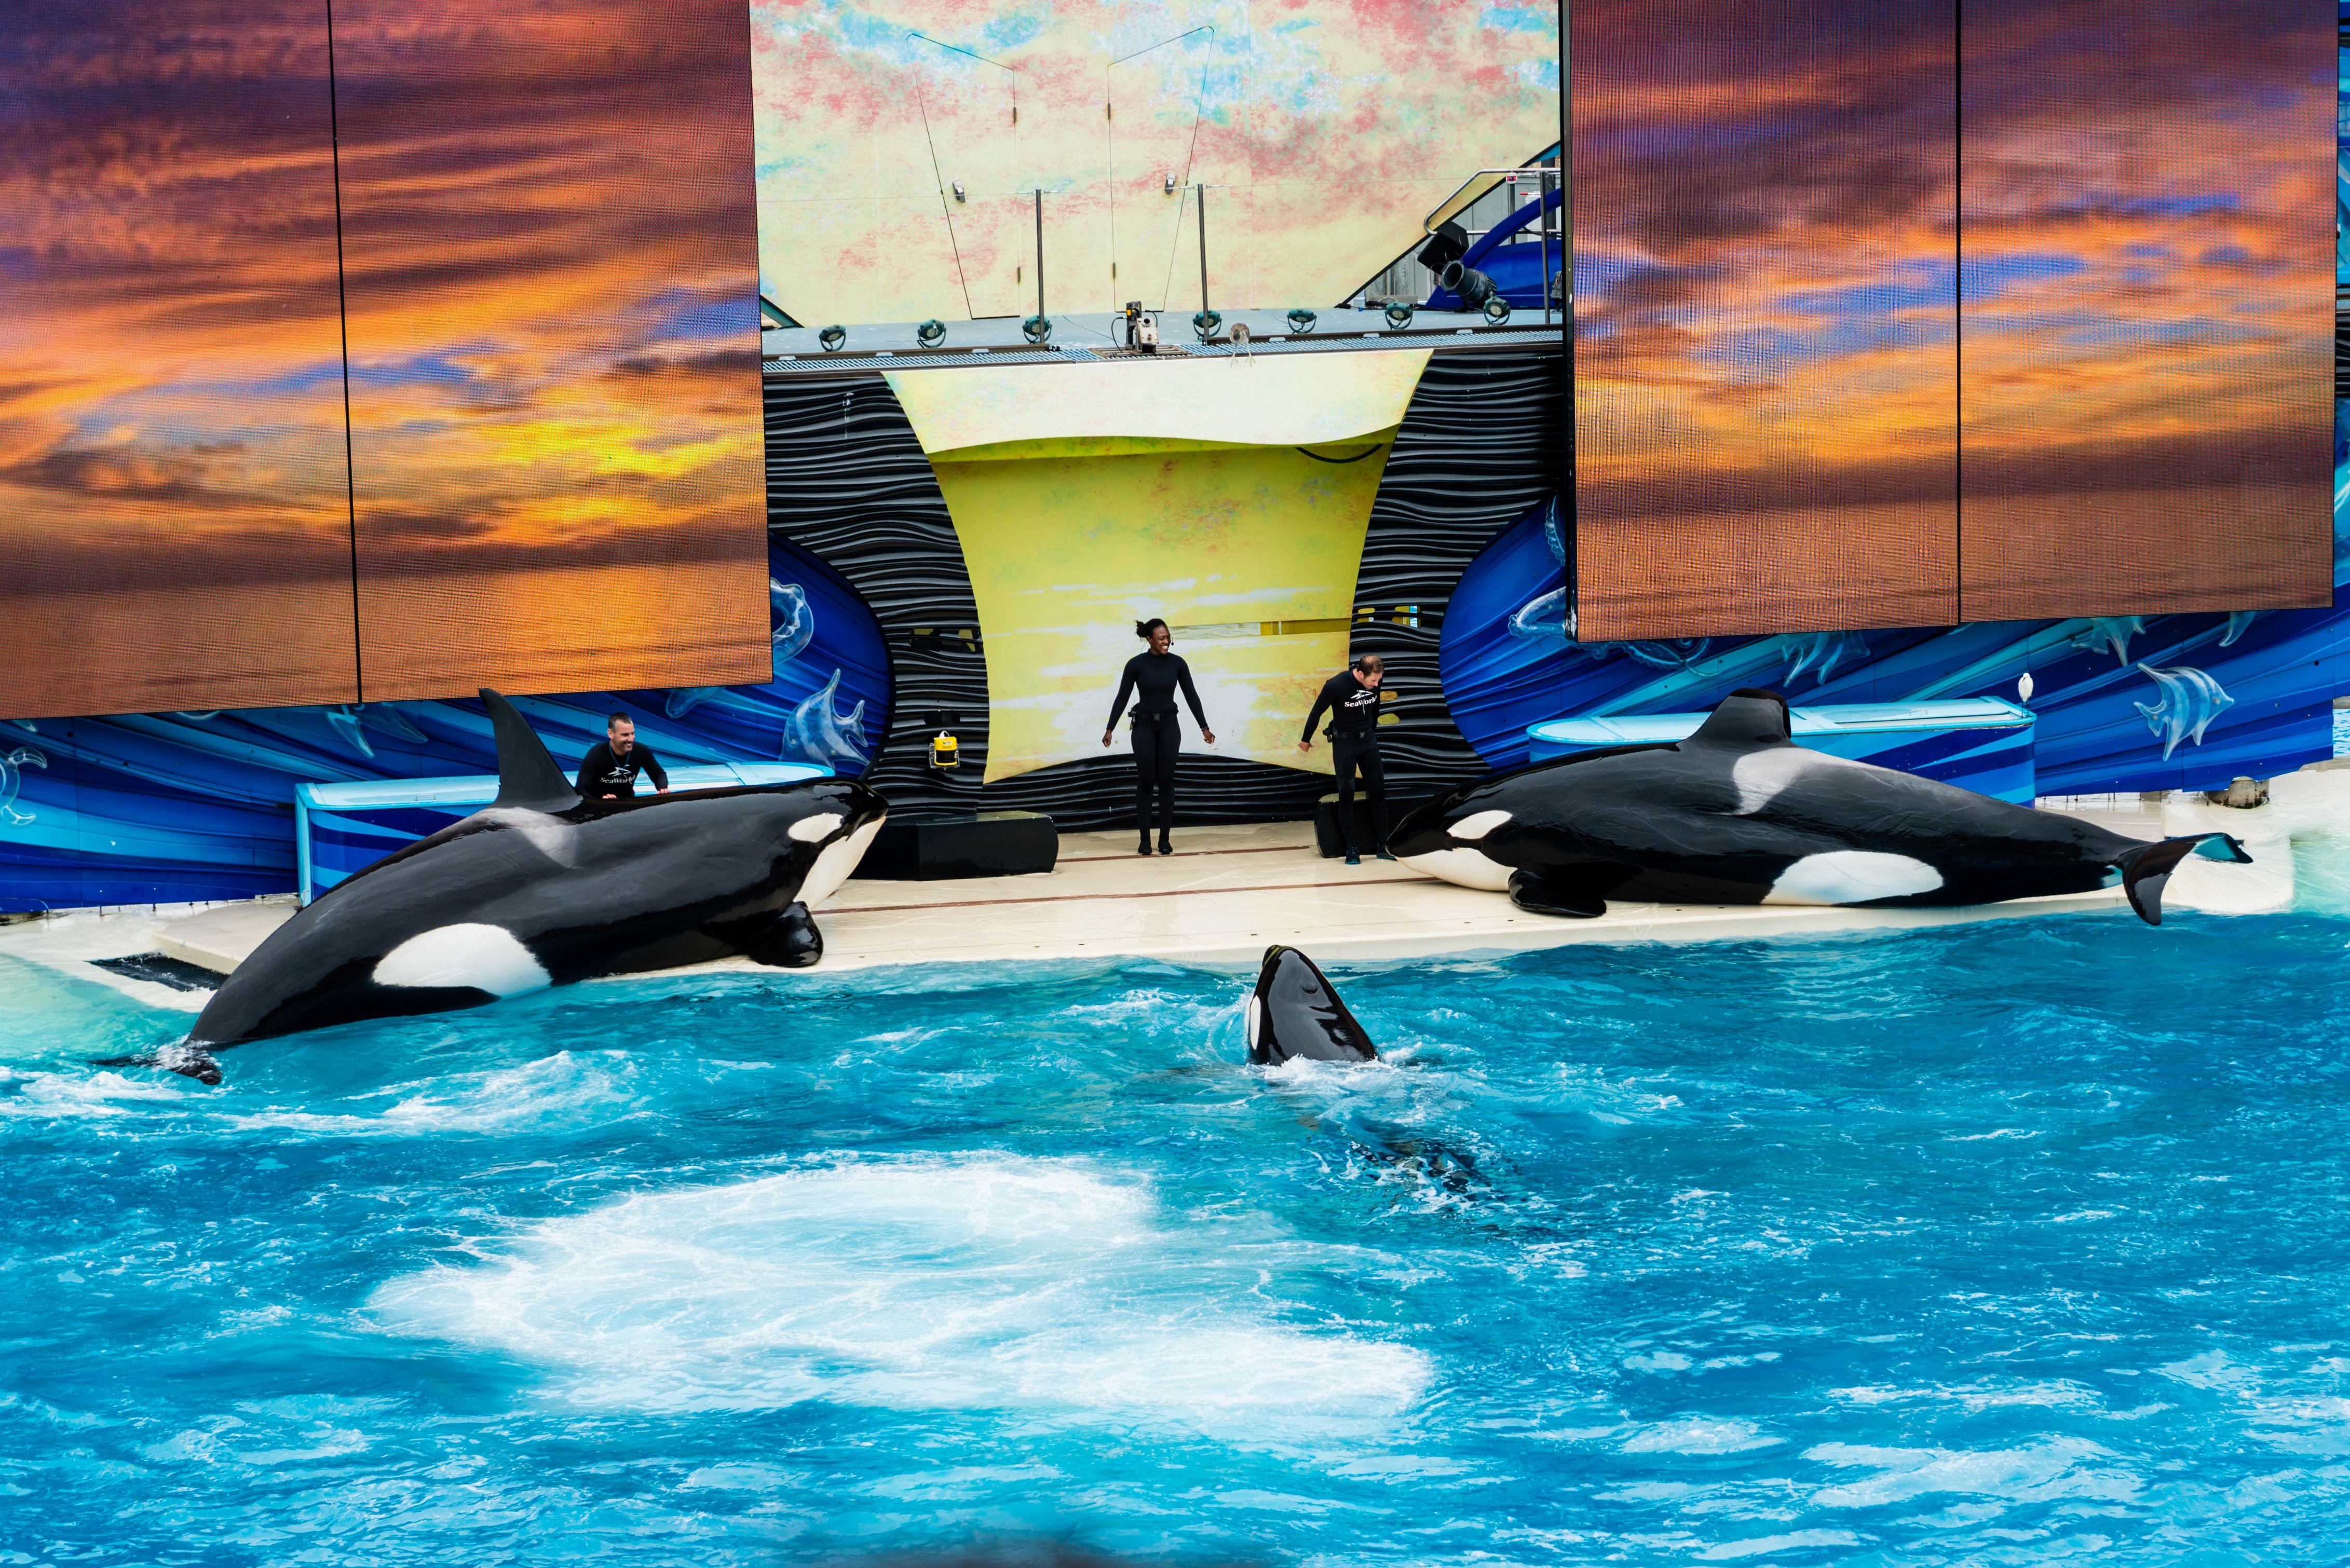 Seaworld image Orca Show HD wallpaper and background photo